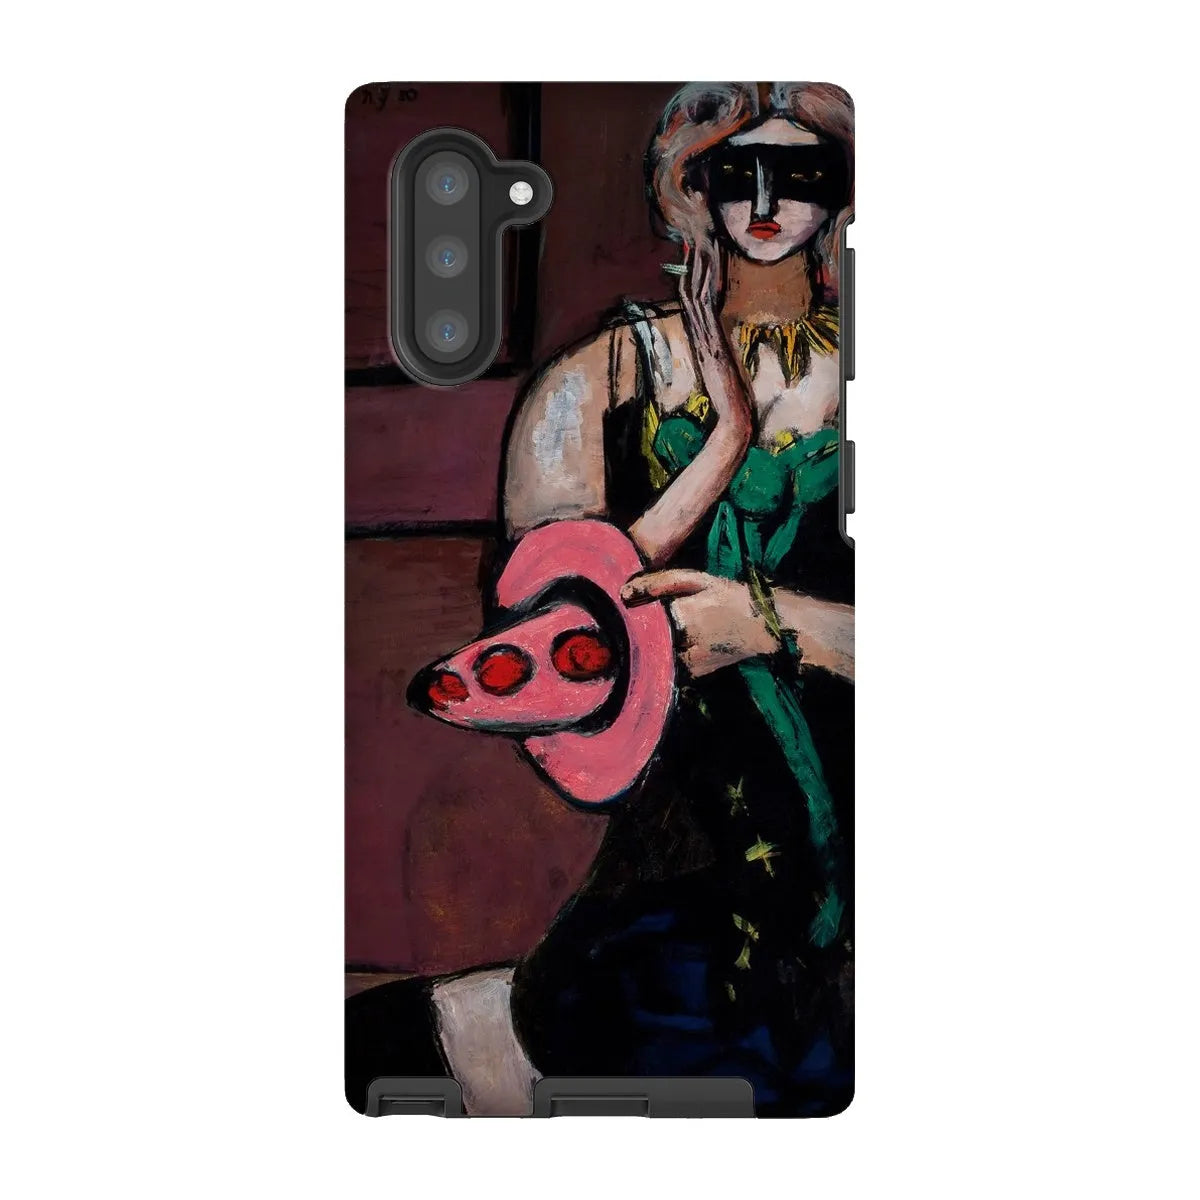 Carnival Mask - German Art Phone Case - Max Beckmann - Samsung Galaxy Note 10 / Matte - Mobile Phone Cases - Aesthetic